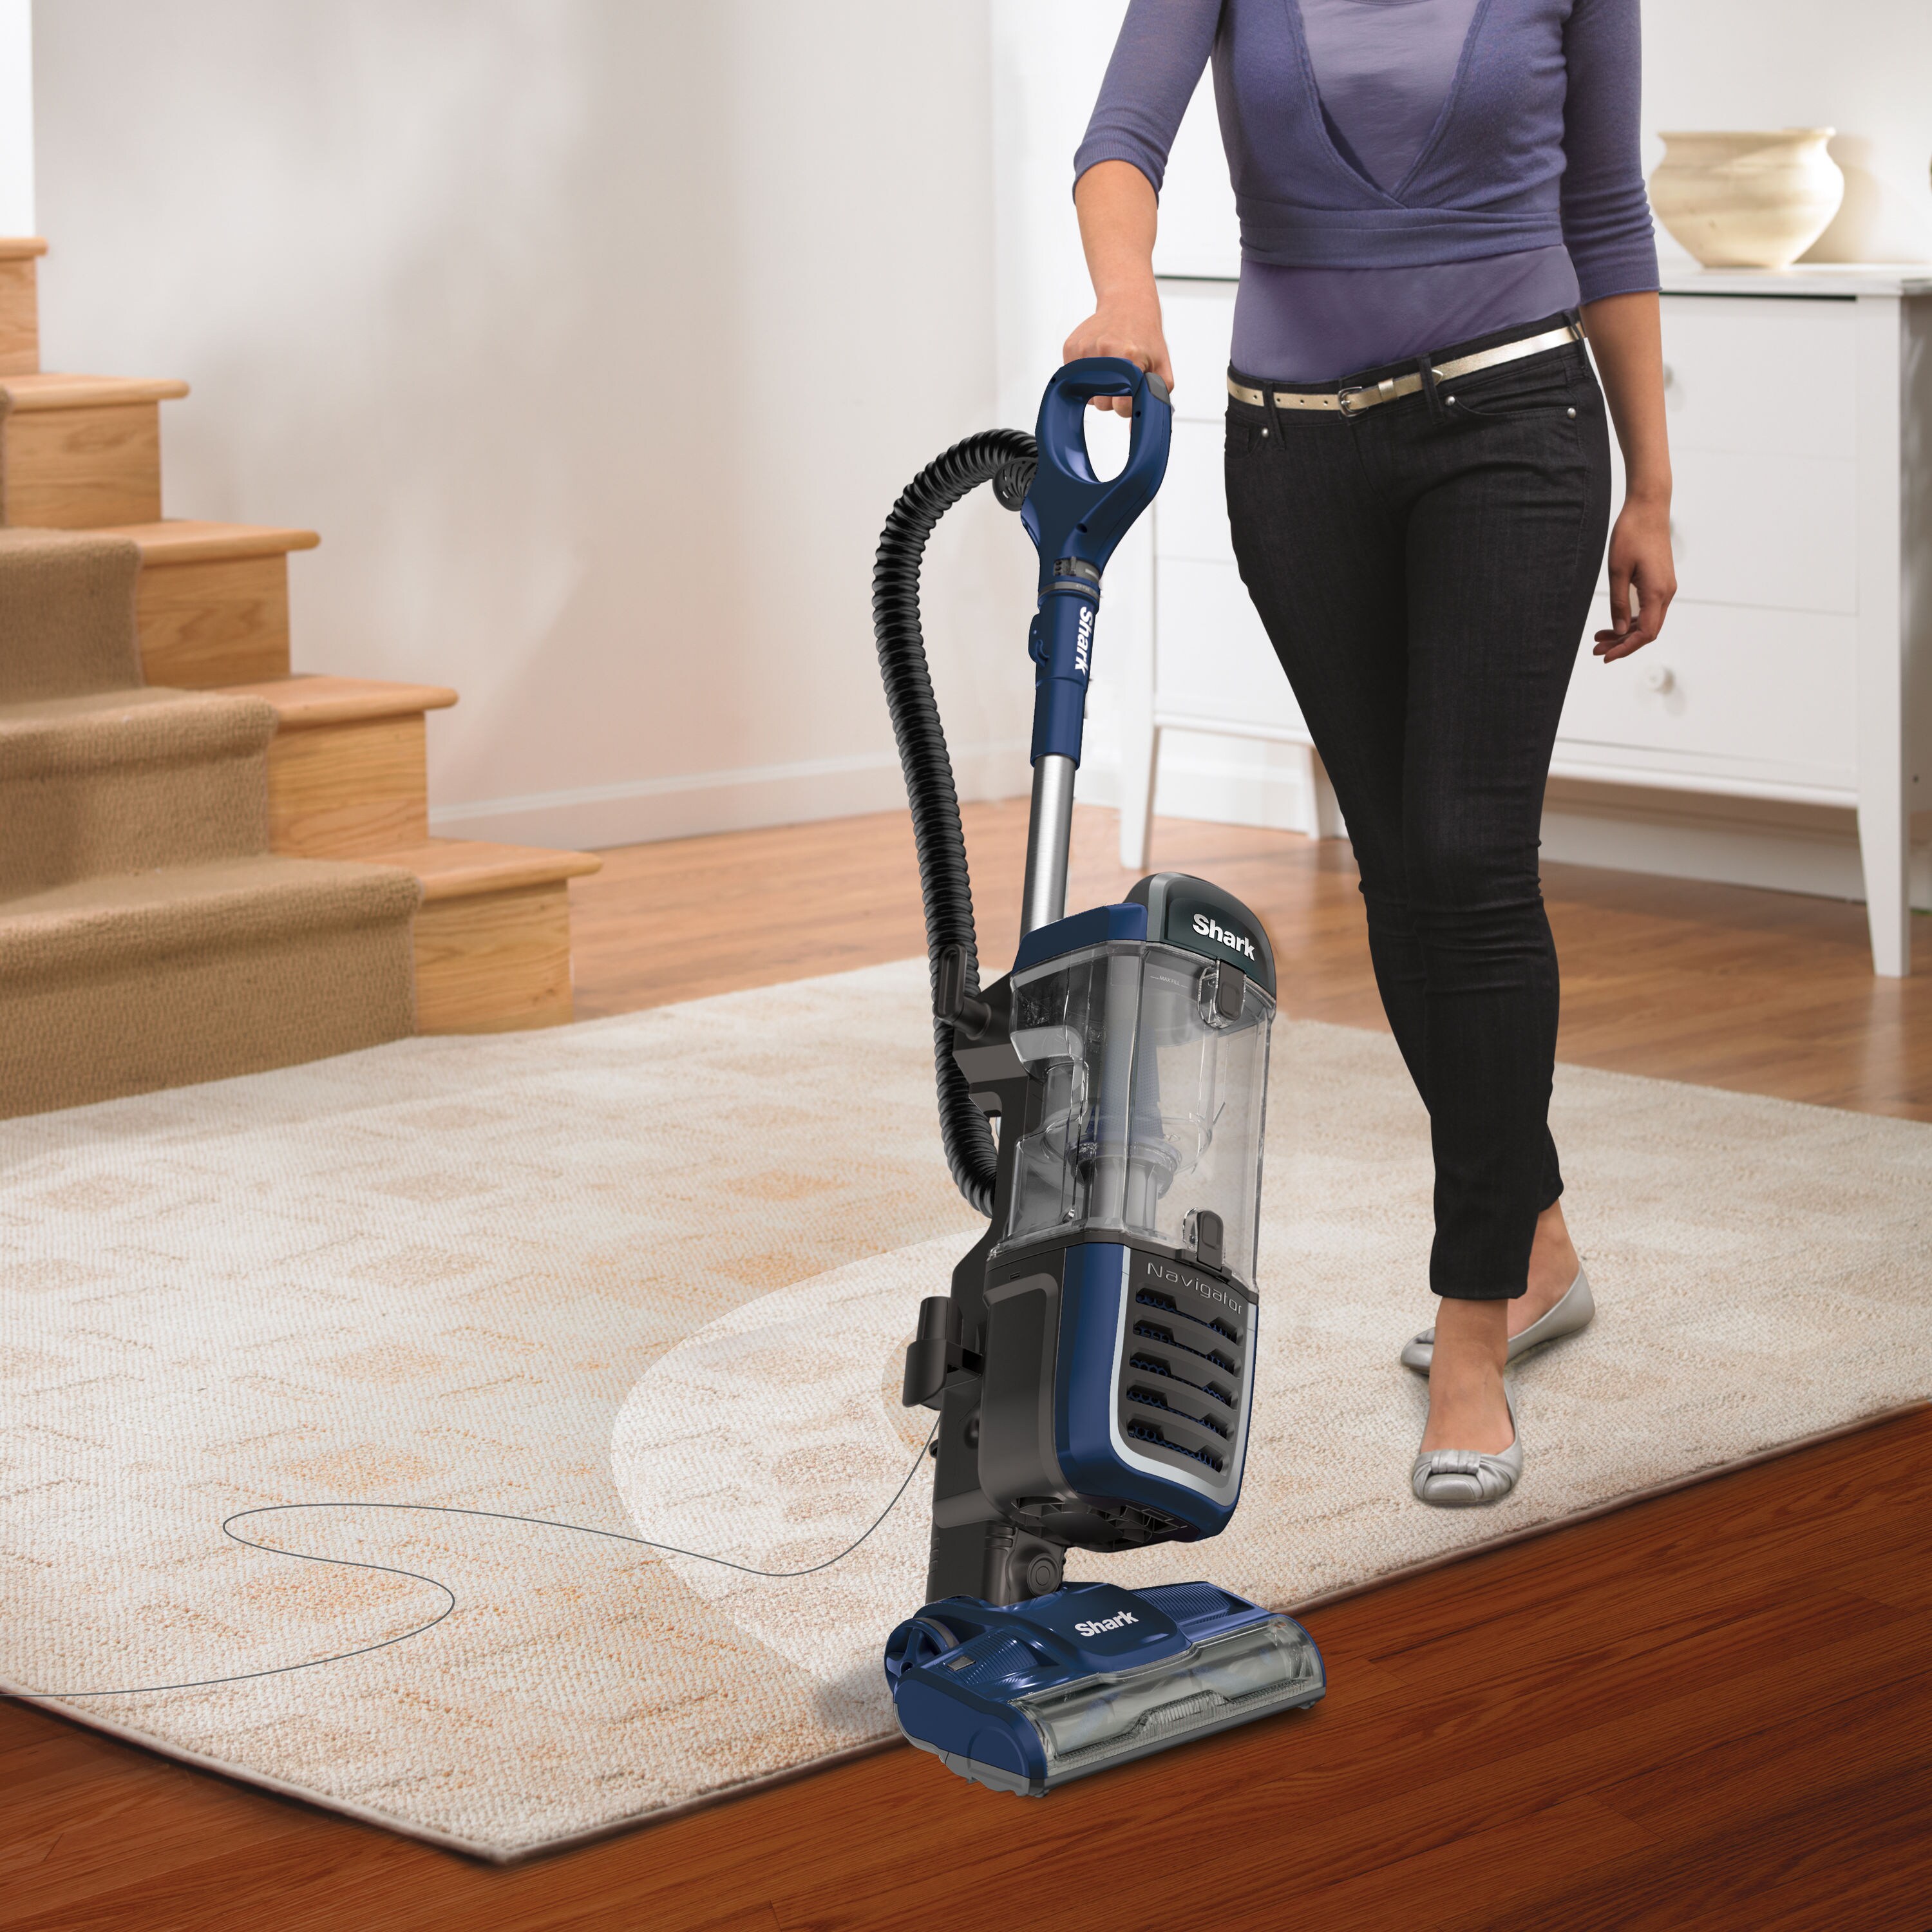 . RENEWED Shark Navigator Swivel Pro Complete Upright Vacuum NV150 Lift-Away Corded Bagless Vacuum for Carpet and Hard Floor and Anti-Allergy . 